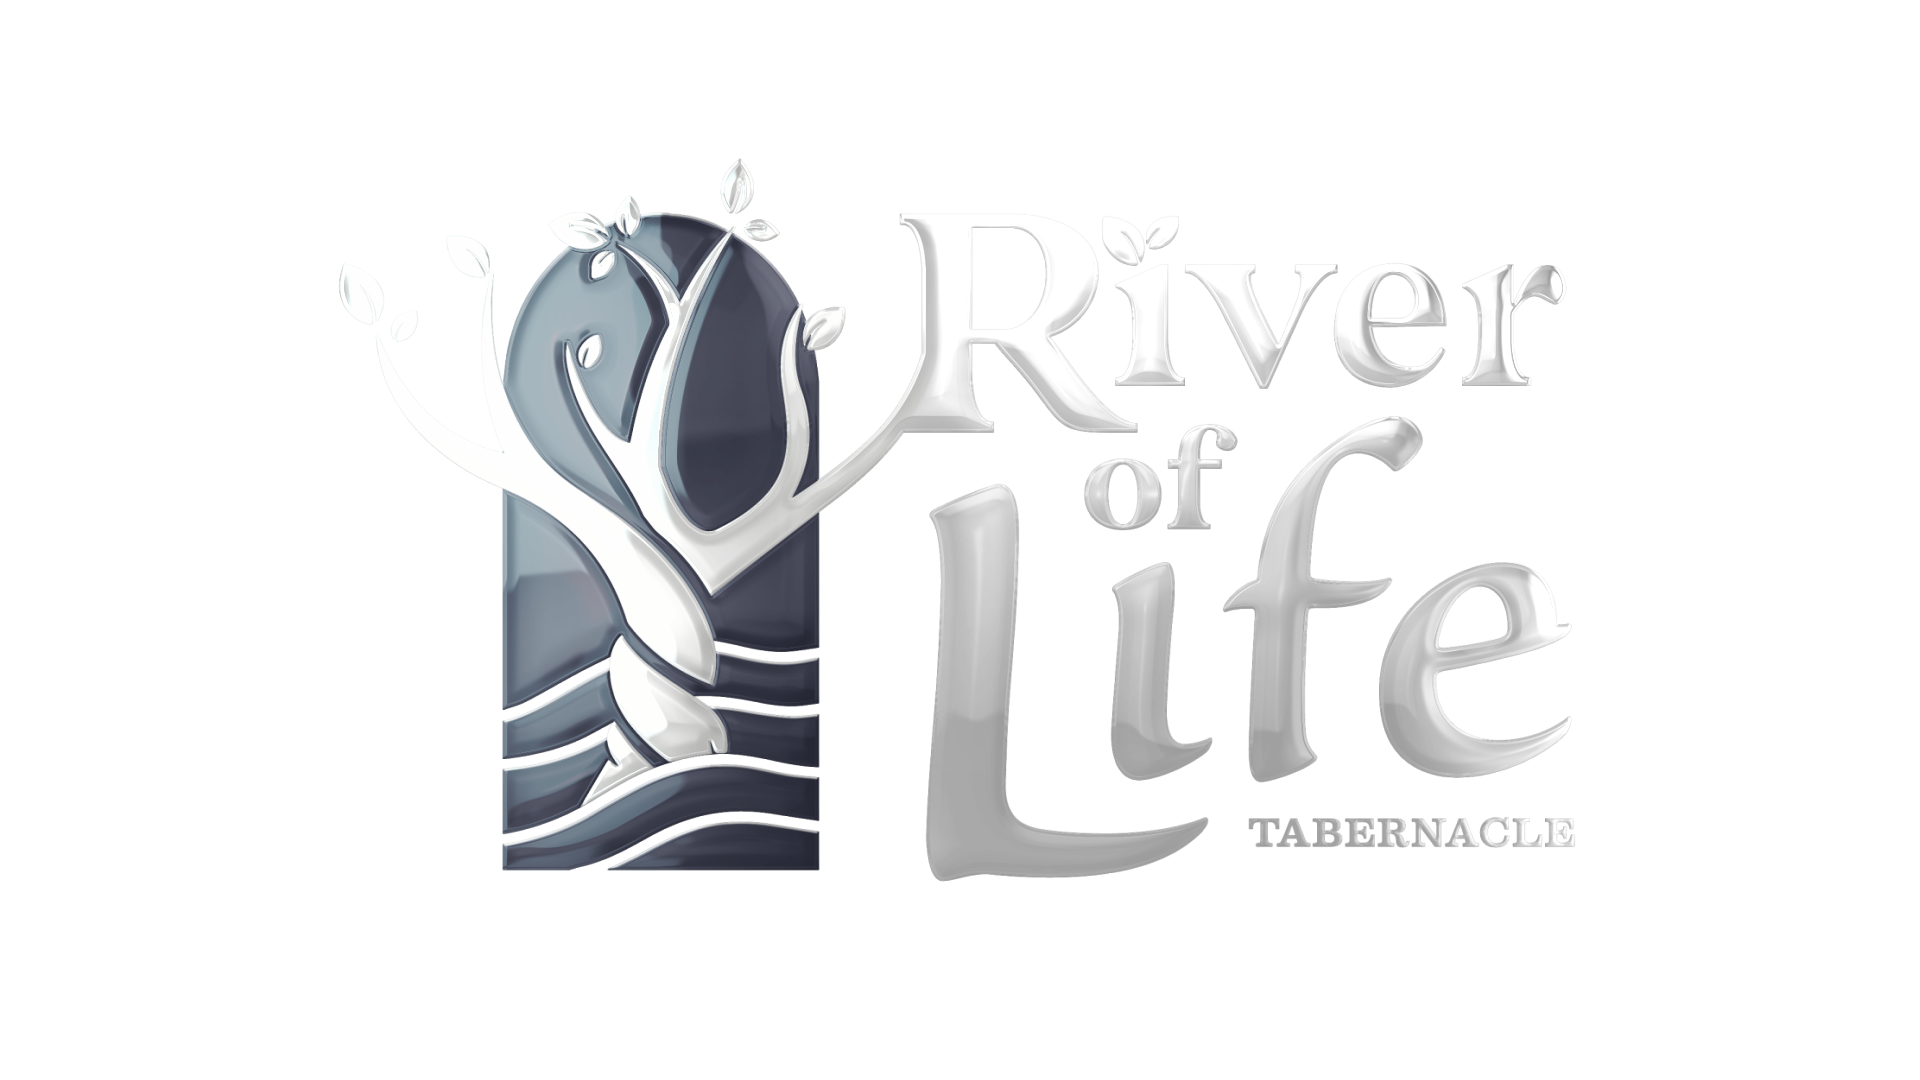 RIVER OF LIFE TABERNACLE